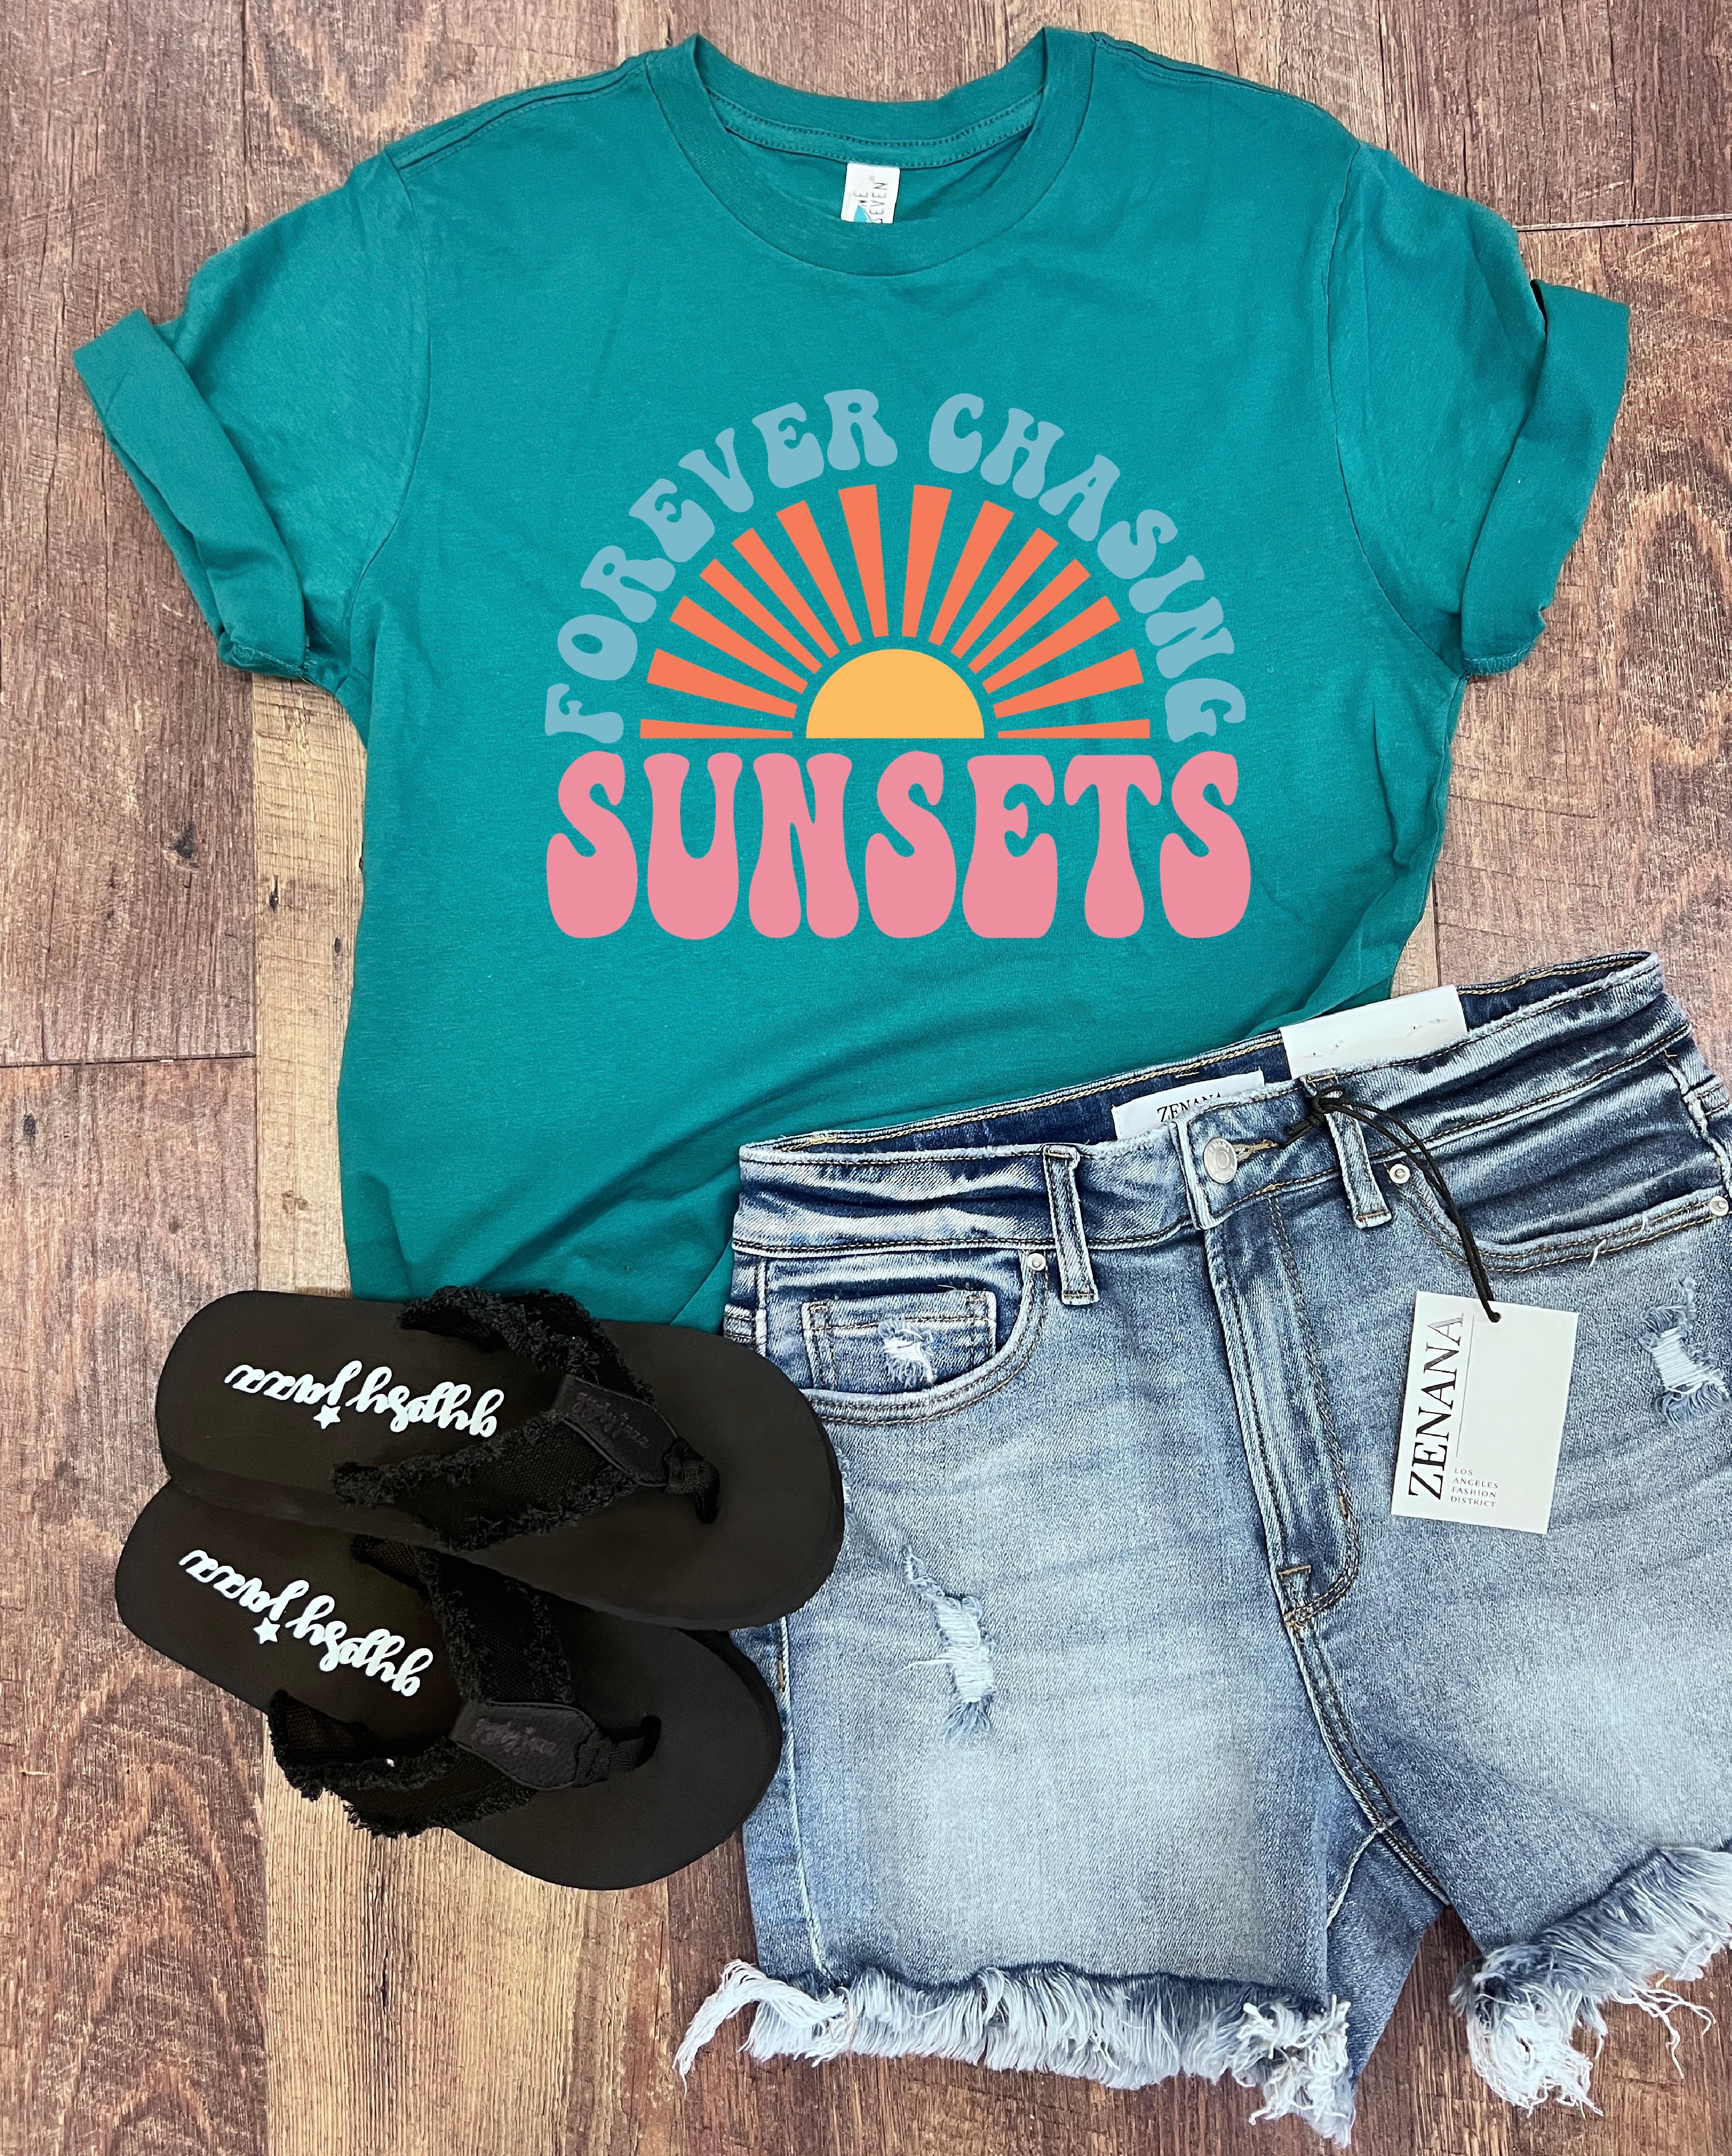 Forever Chasing Sunsets Tee in Teal